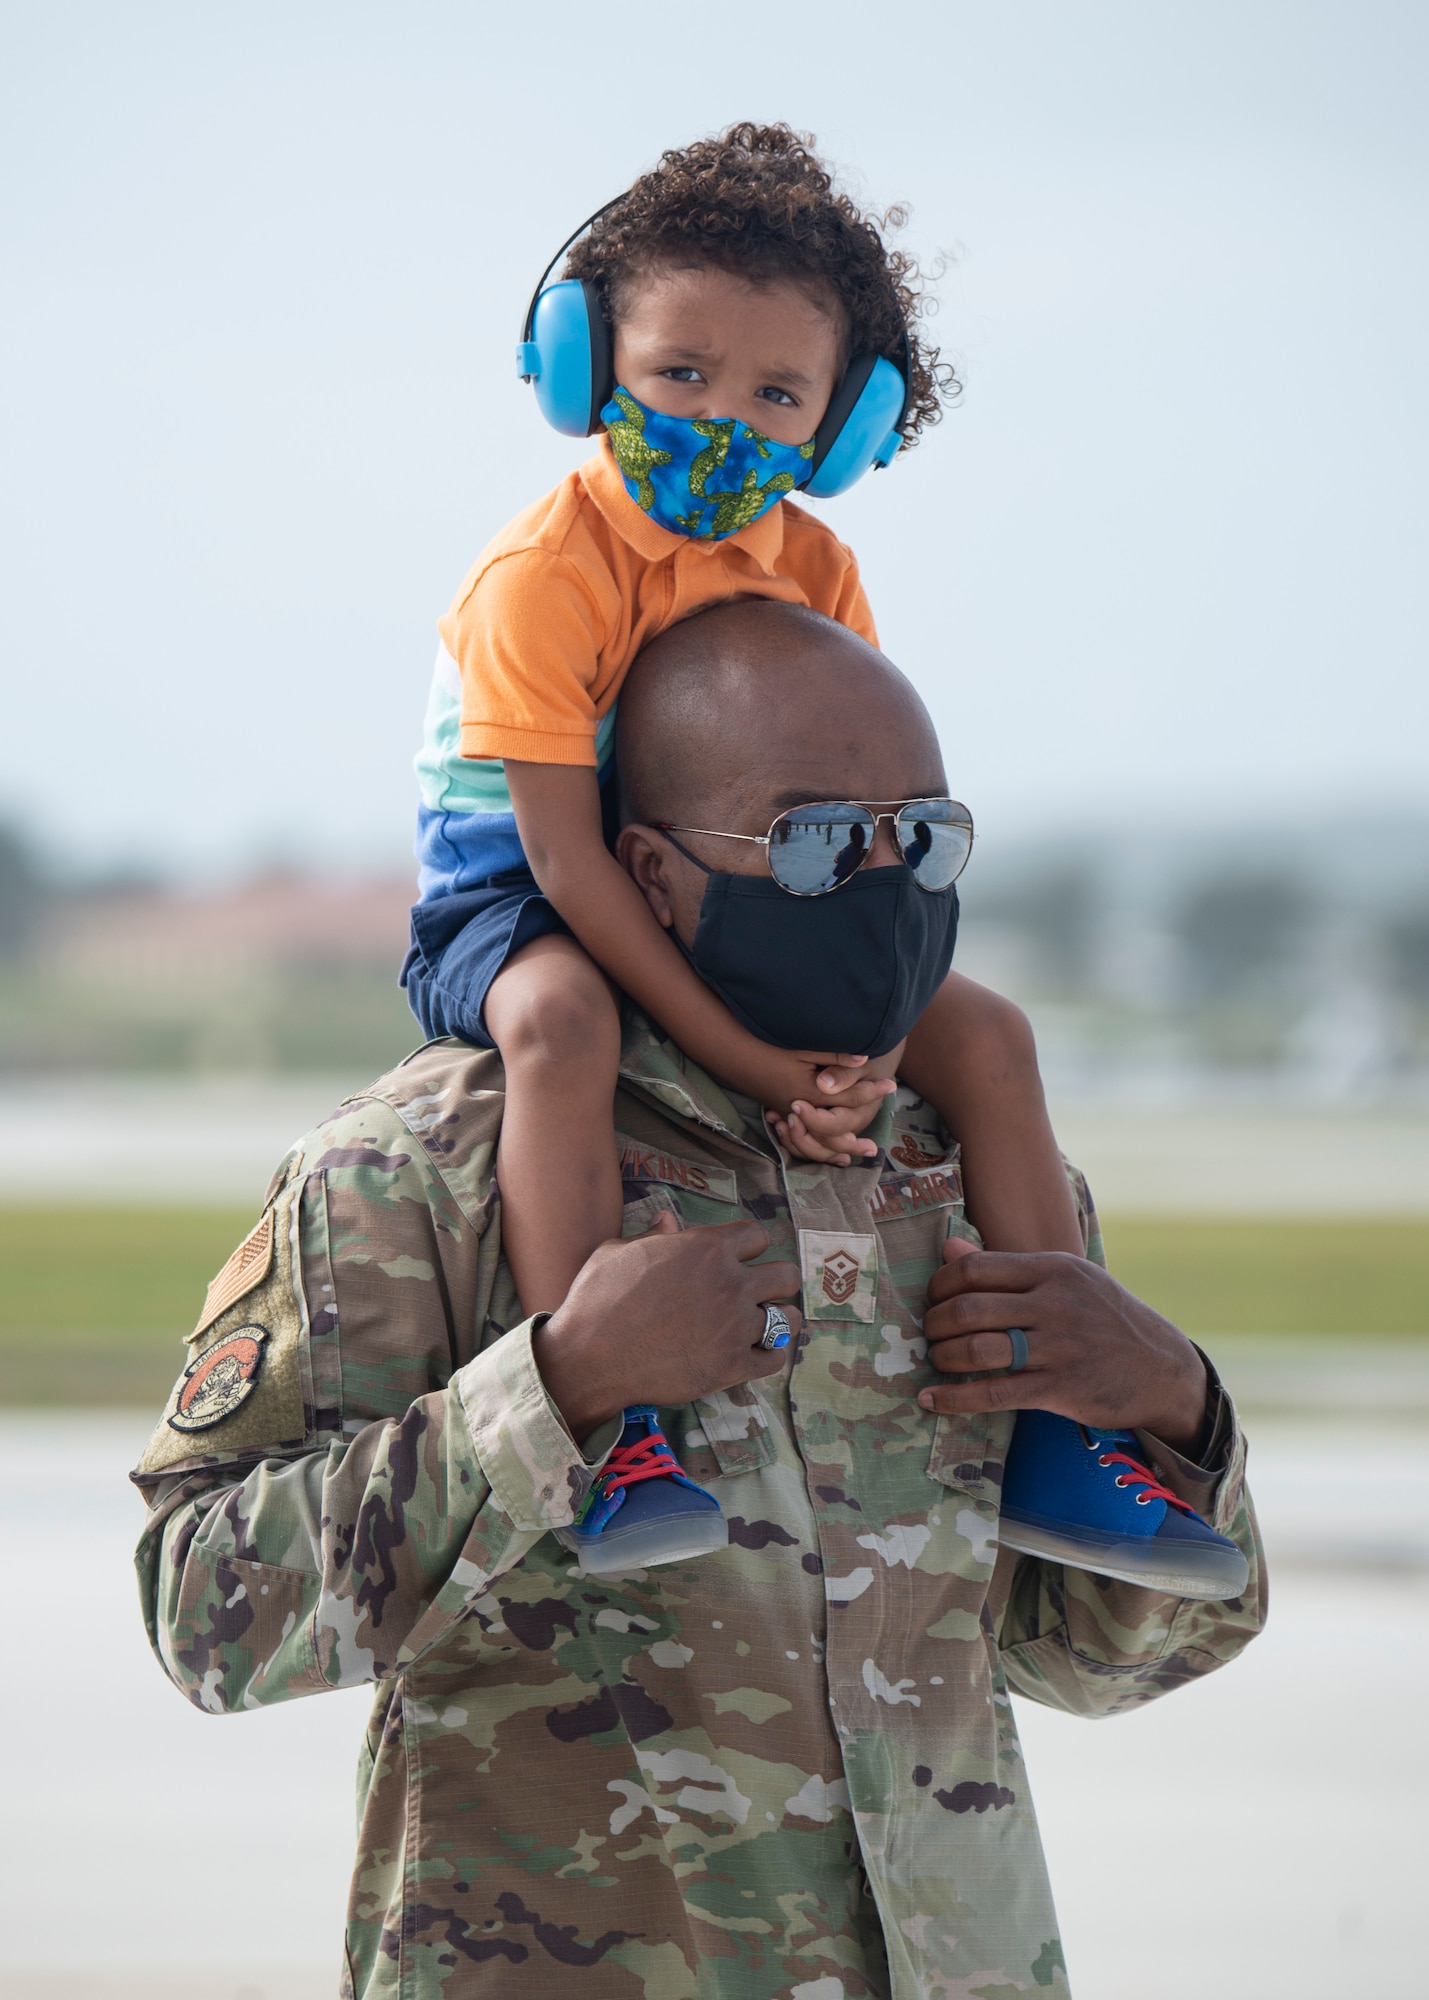 Master Sgt. Marcus Hawkins, 36th Munitions Squadron first sergeant, holds his son on his shoulders during a group flight line engagement for Exercise Cope North 2021 at Andersen Air Force Base, Guam, Feb. 5, 2021. Exercise Cope North 2021 is an annual U.S. Pacific Air Forces joint/combined, trilateral field training exercise occurring Feb. 3-19, 2021. (U.S. Air Force photo by Senior Airman Aubree Owens)